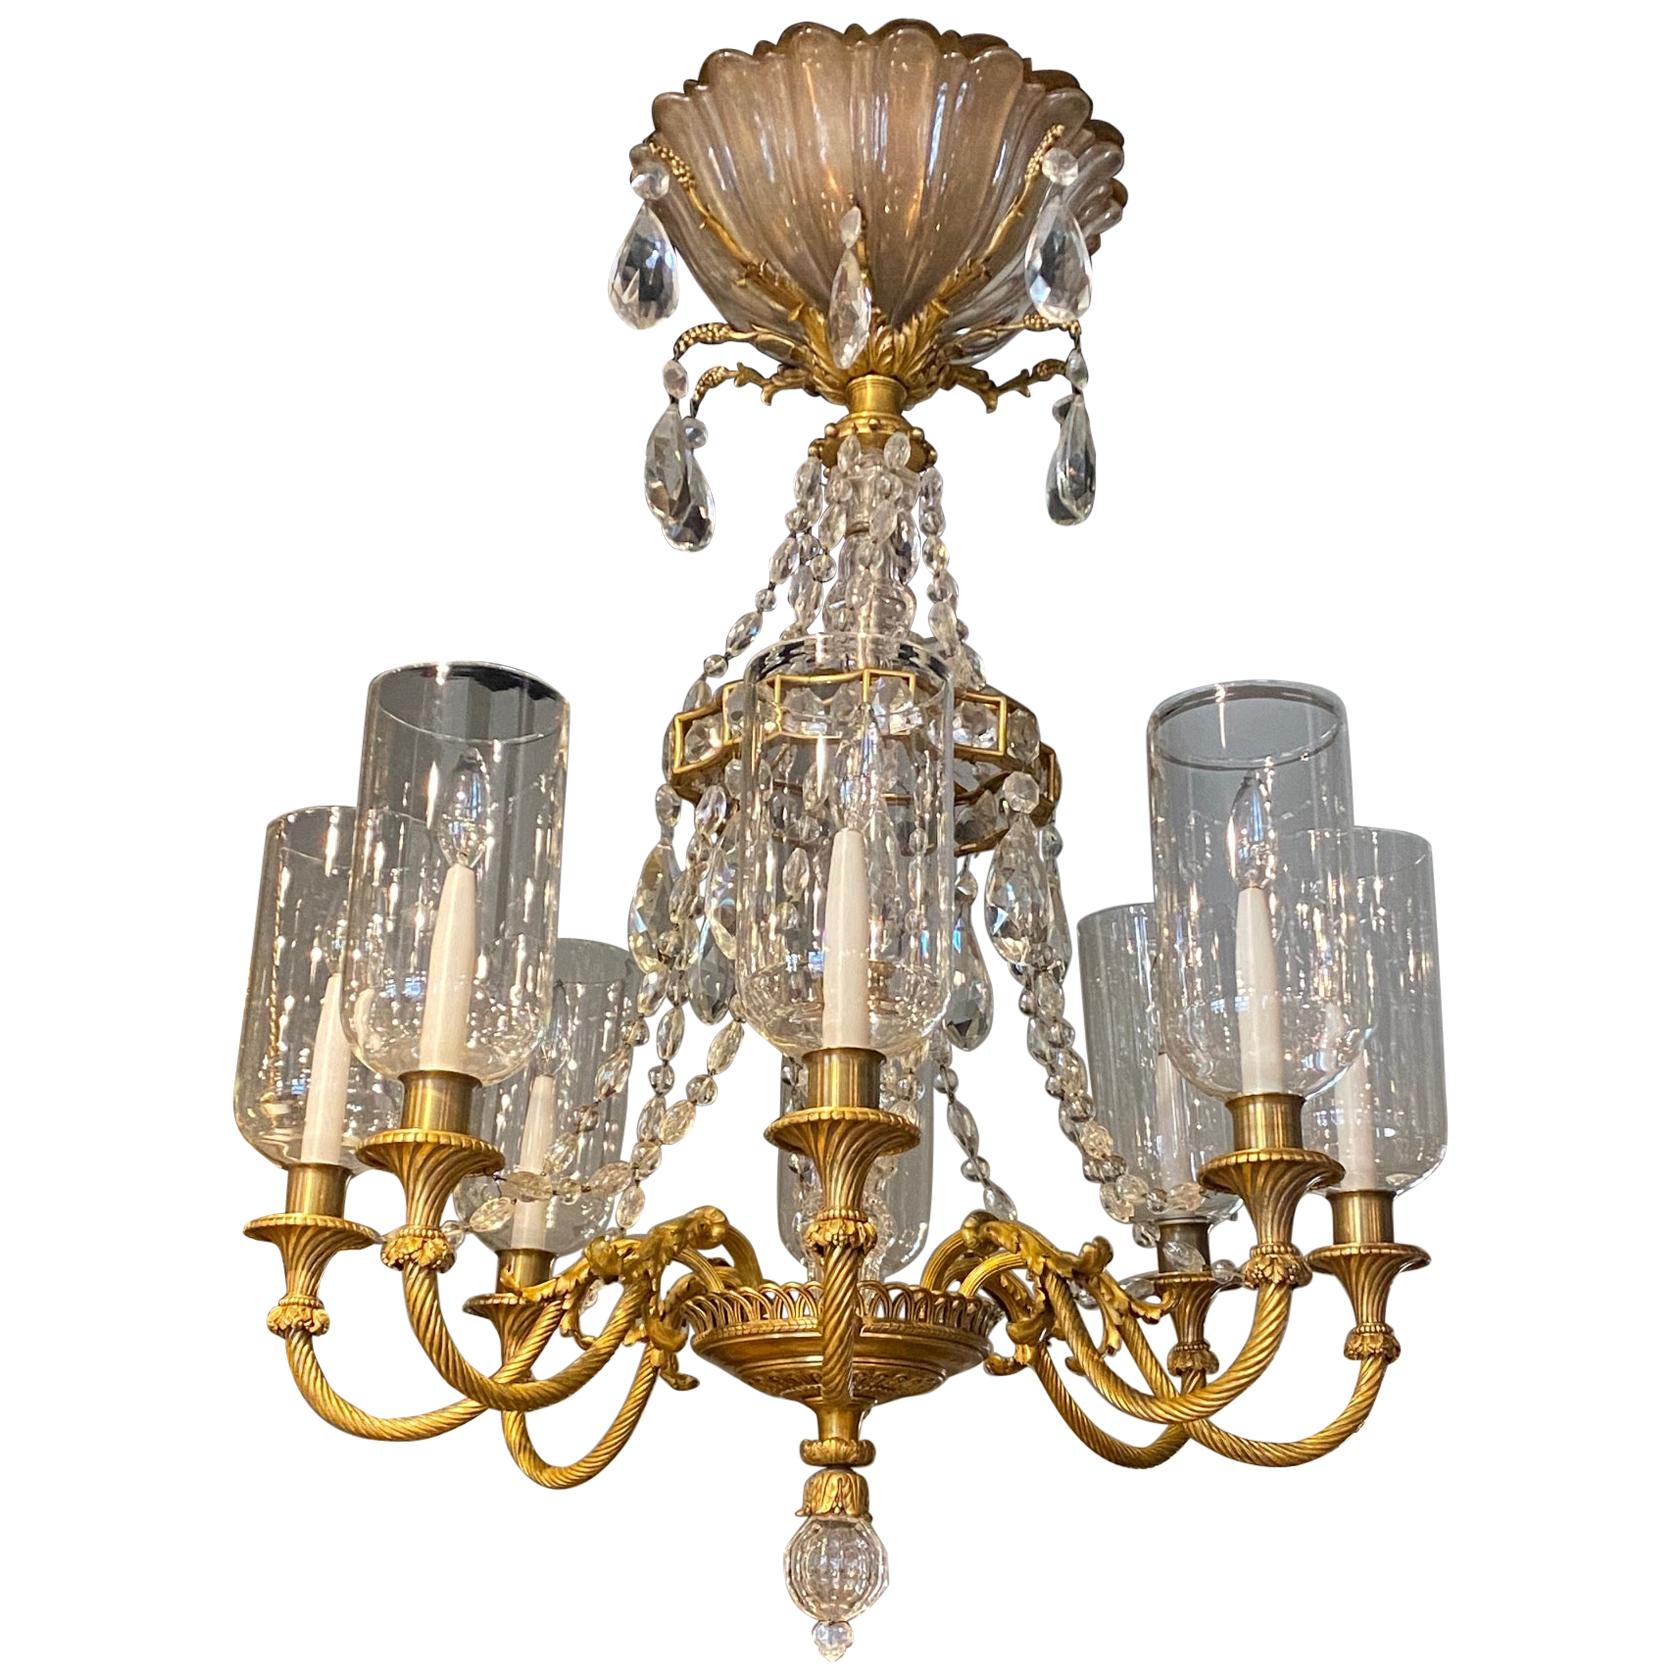 Very Fine Neoclassical Gilt Bronze and Crystal Chandelier by Maison Baguès For Sale